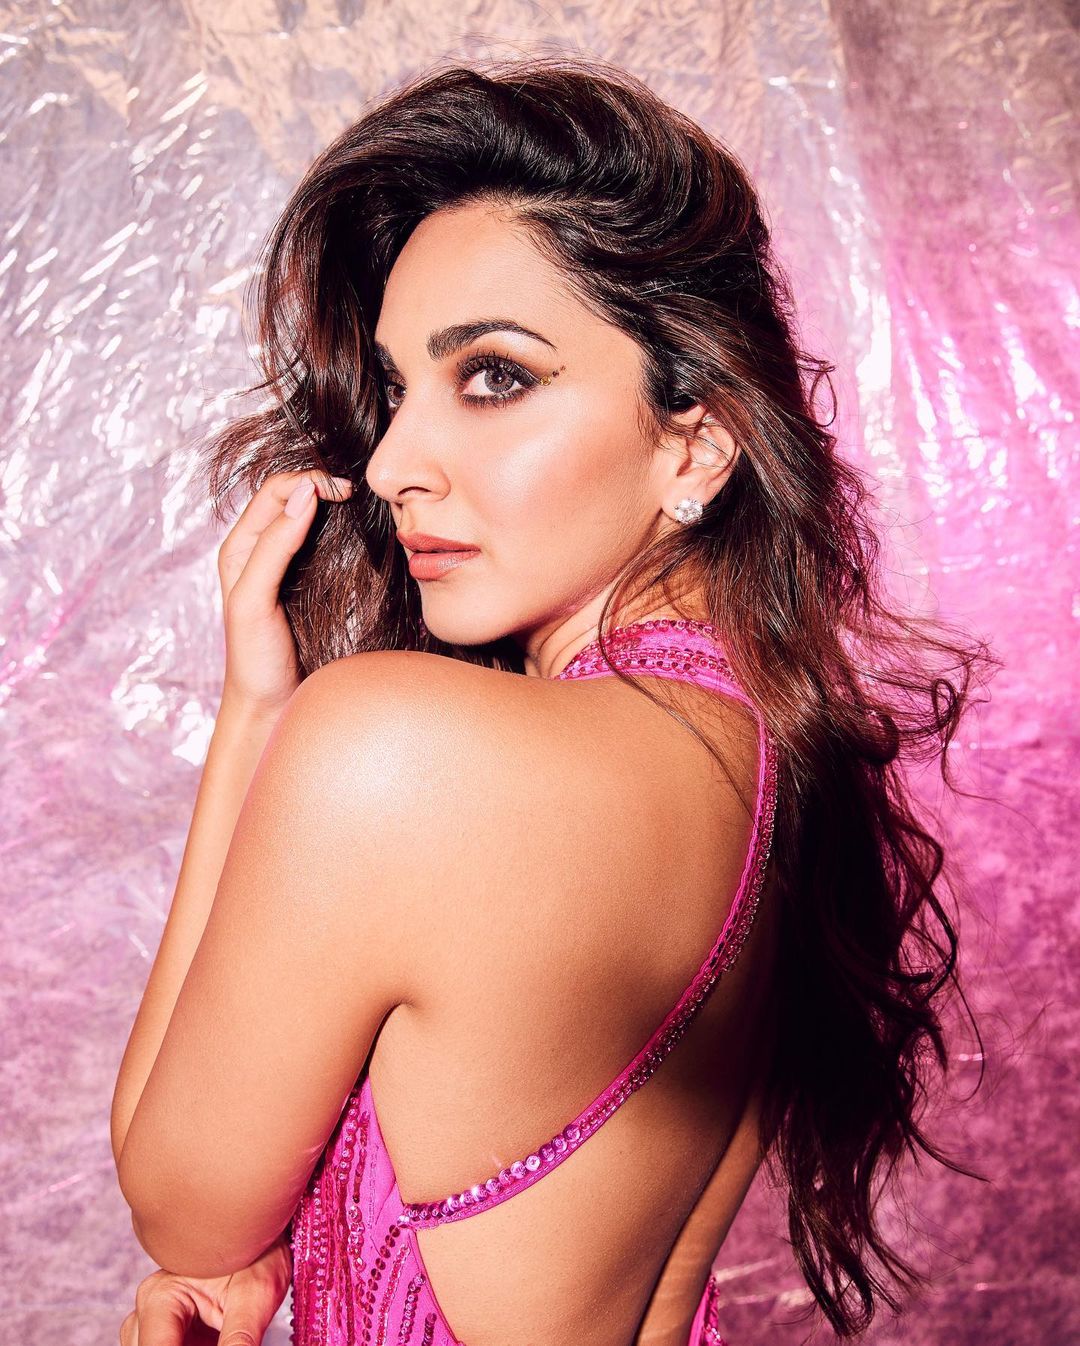 Kiara Advani flaunts her back in the bold pink outfit